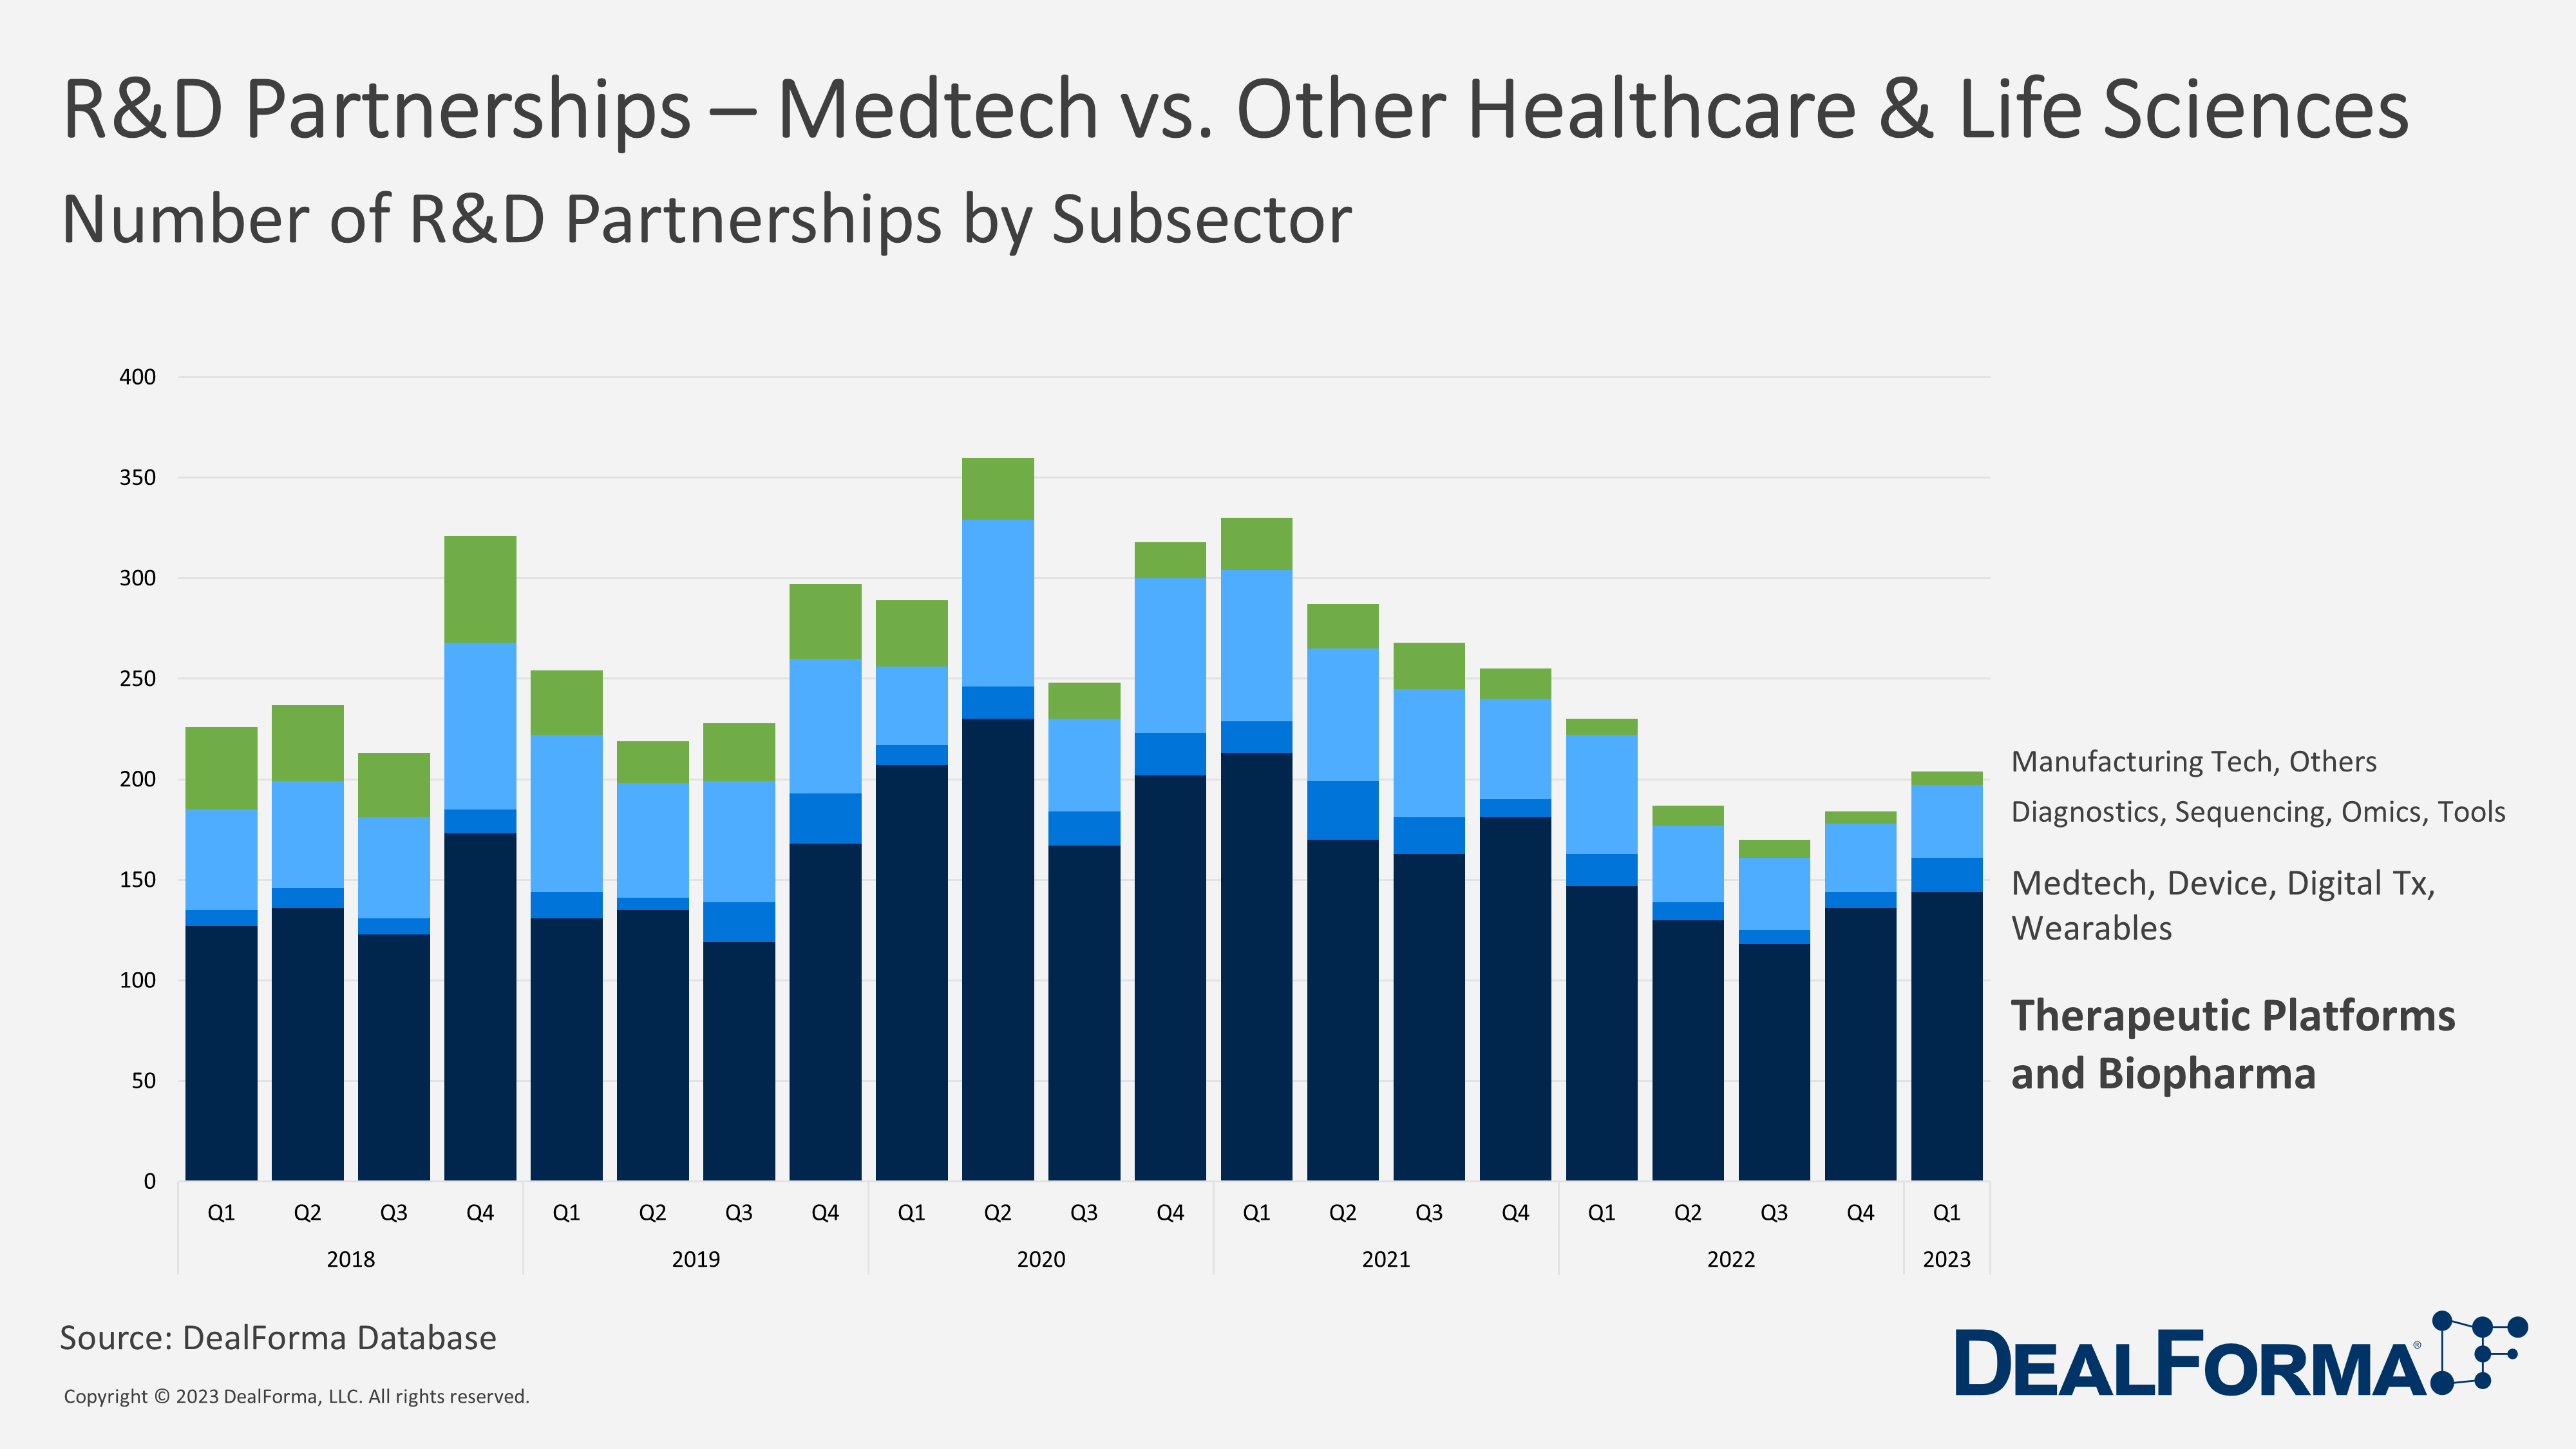 R&D Partnerships - medtech vs other healthcare & life sciences. Number of R&D Partnerships by Sector